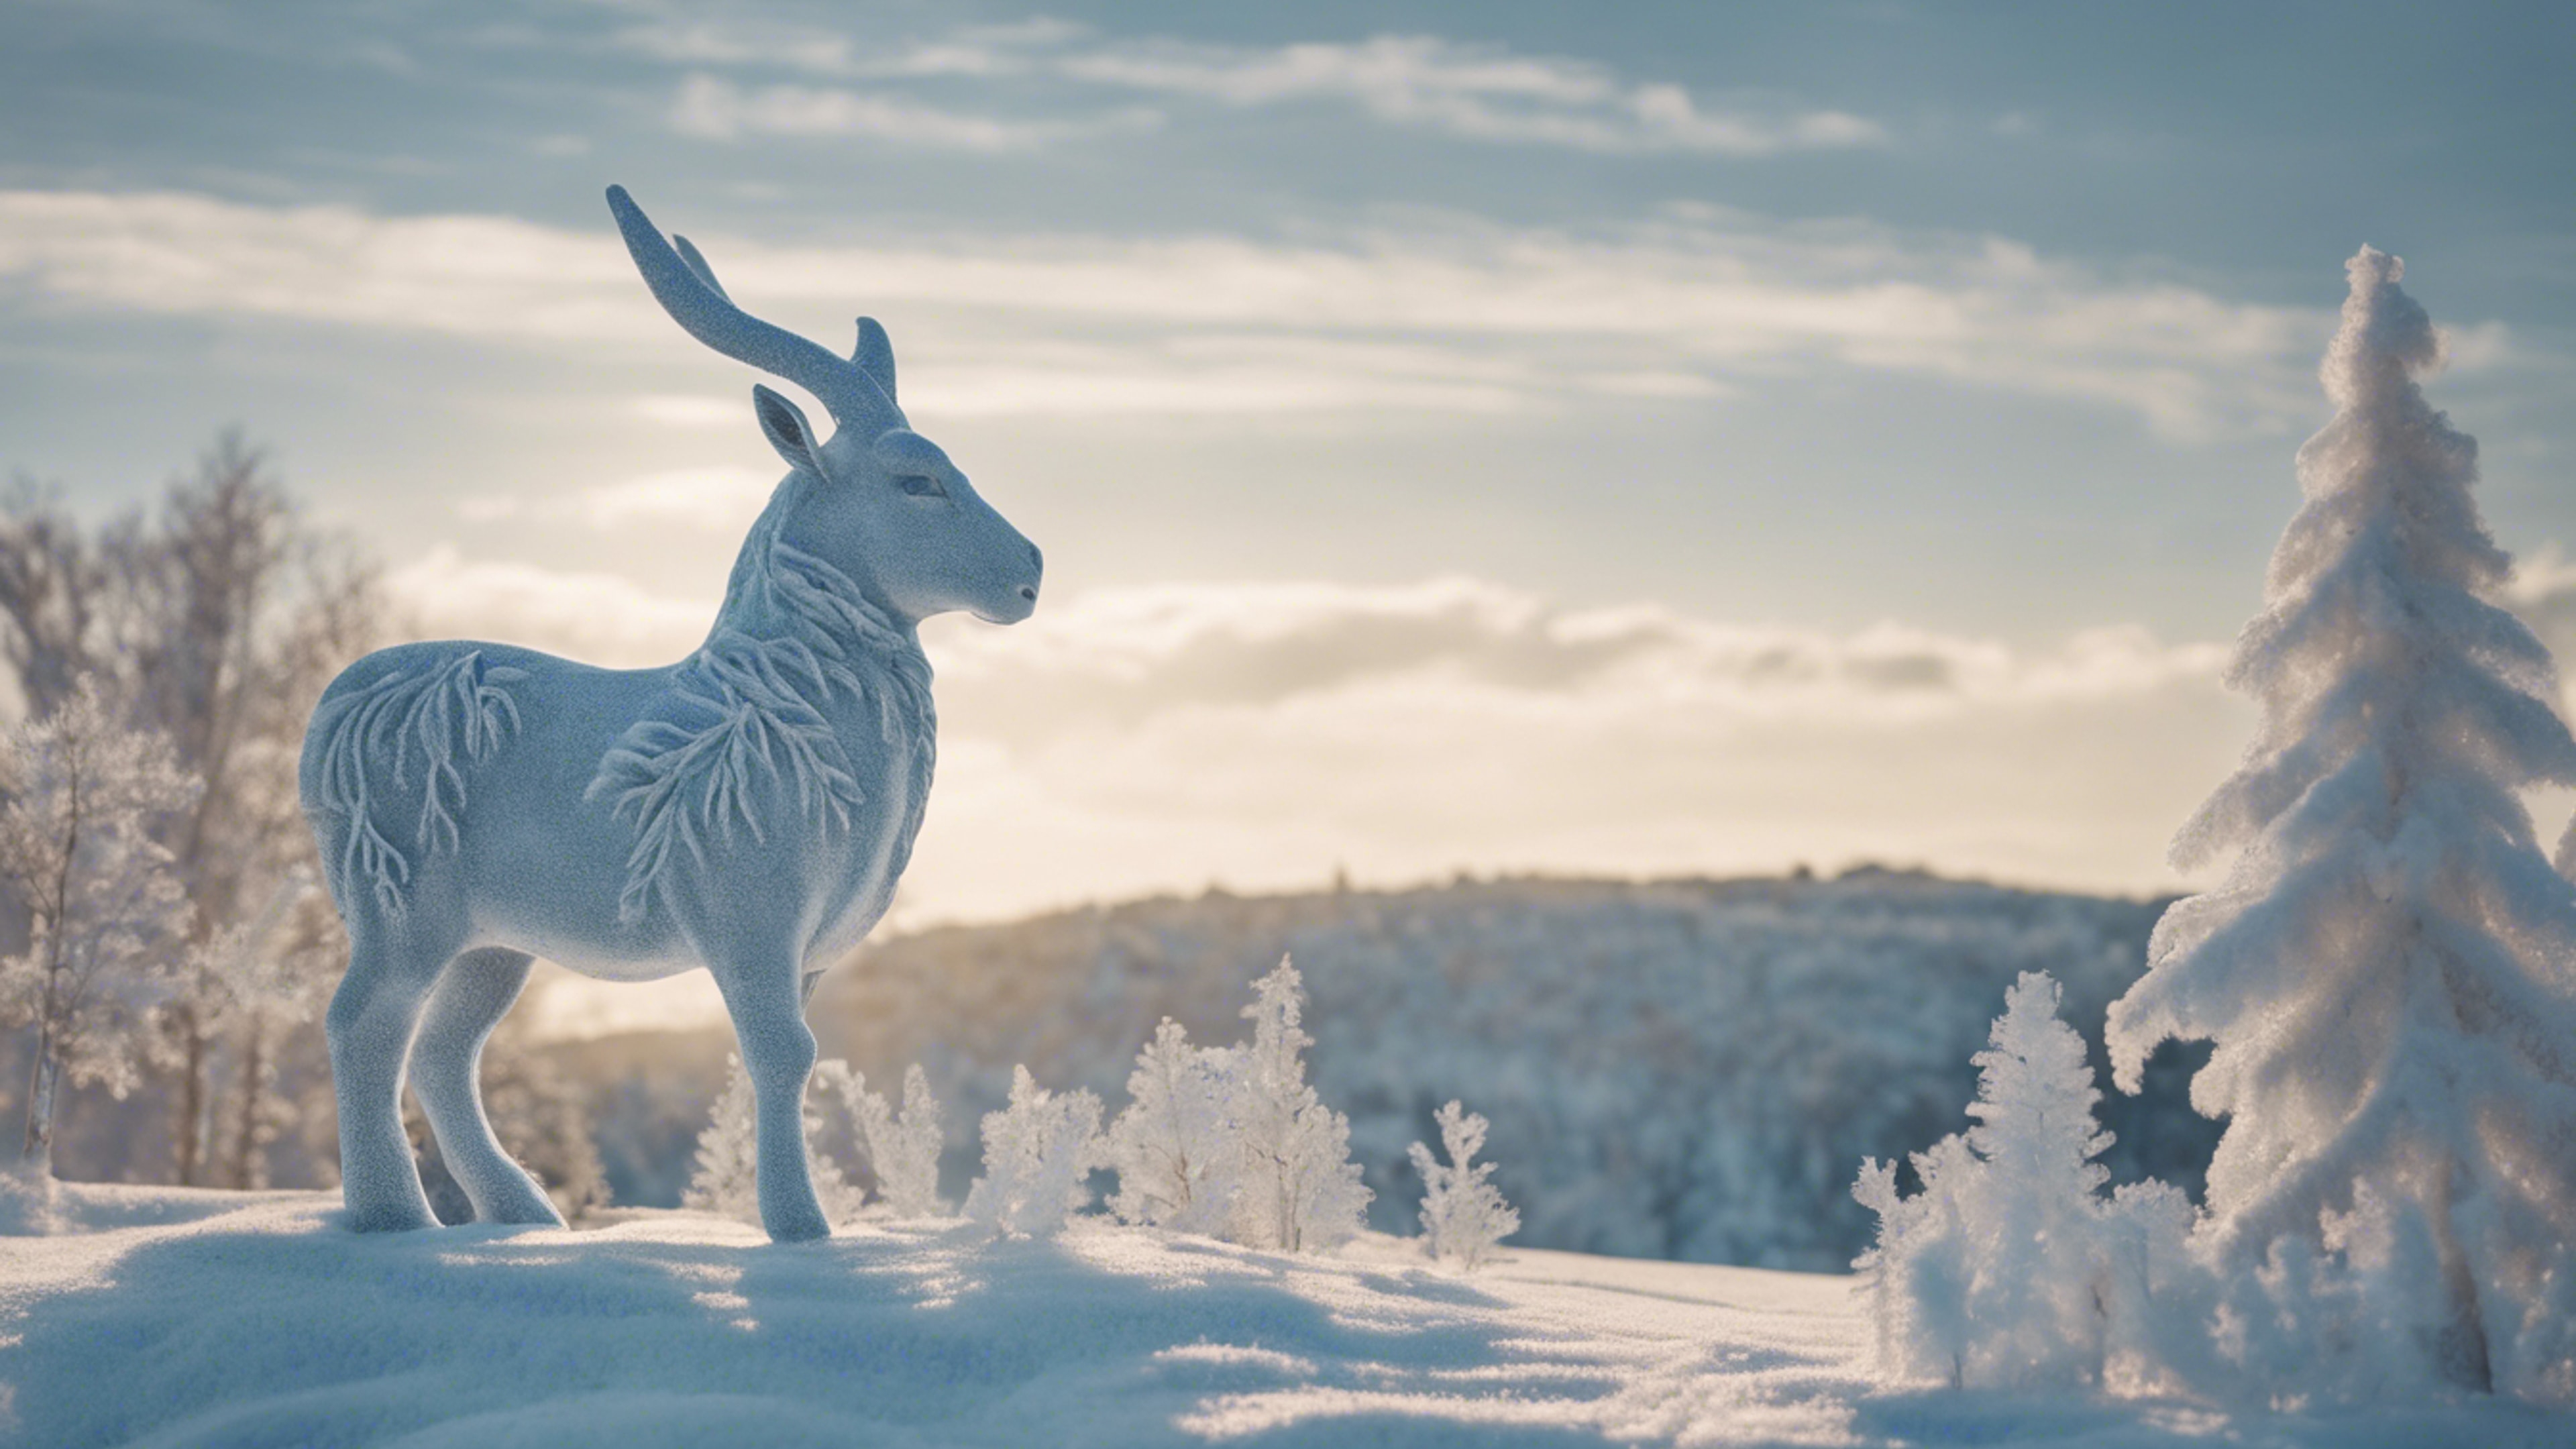 A frosty winter scene with a Capricorn carved out of snow. Wallpaper[482a740671ad4e9e8688]